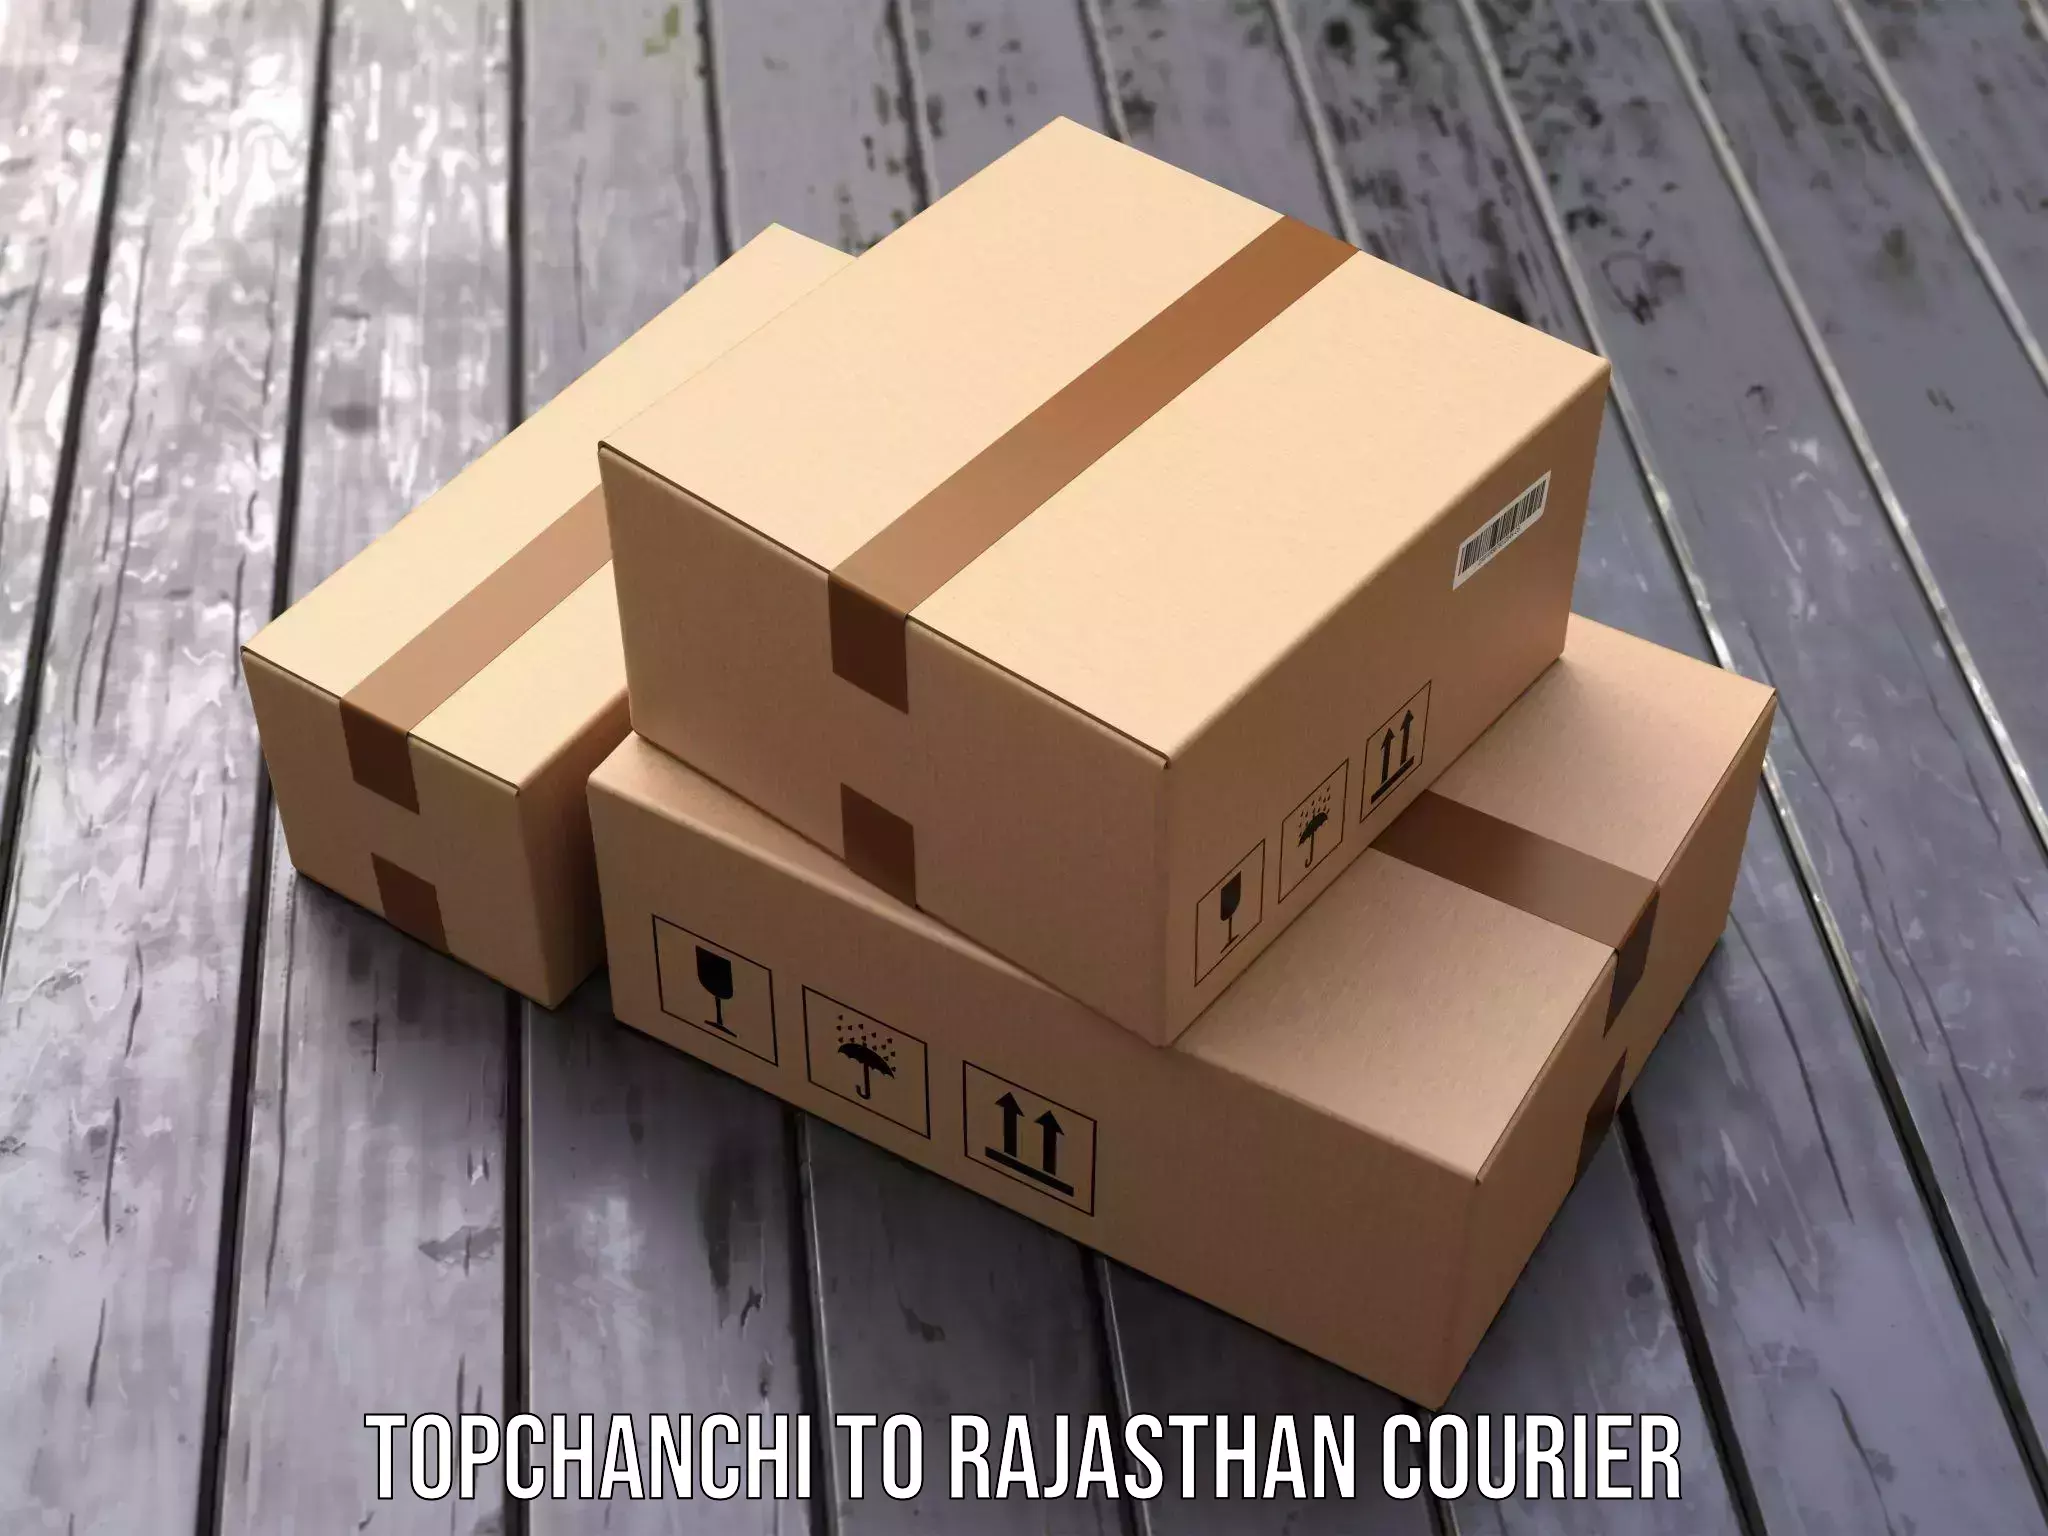 Efficient freight service Topchanchi to Rajasthan